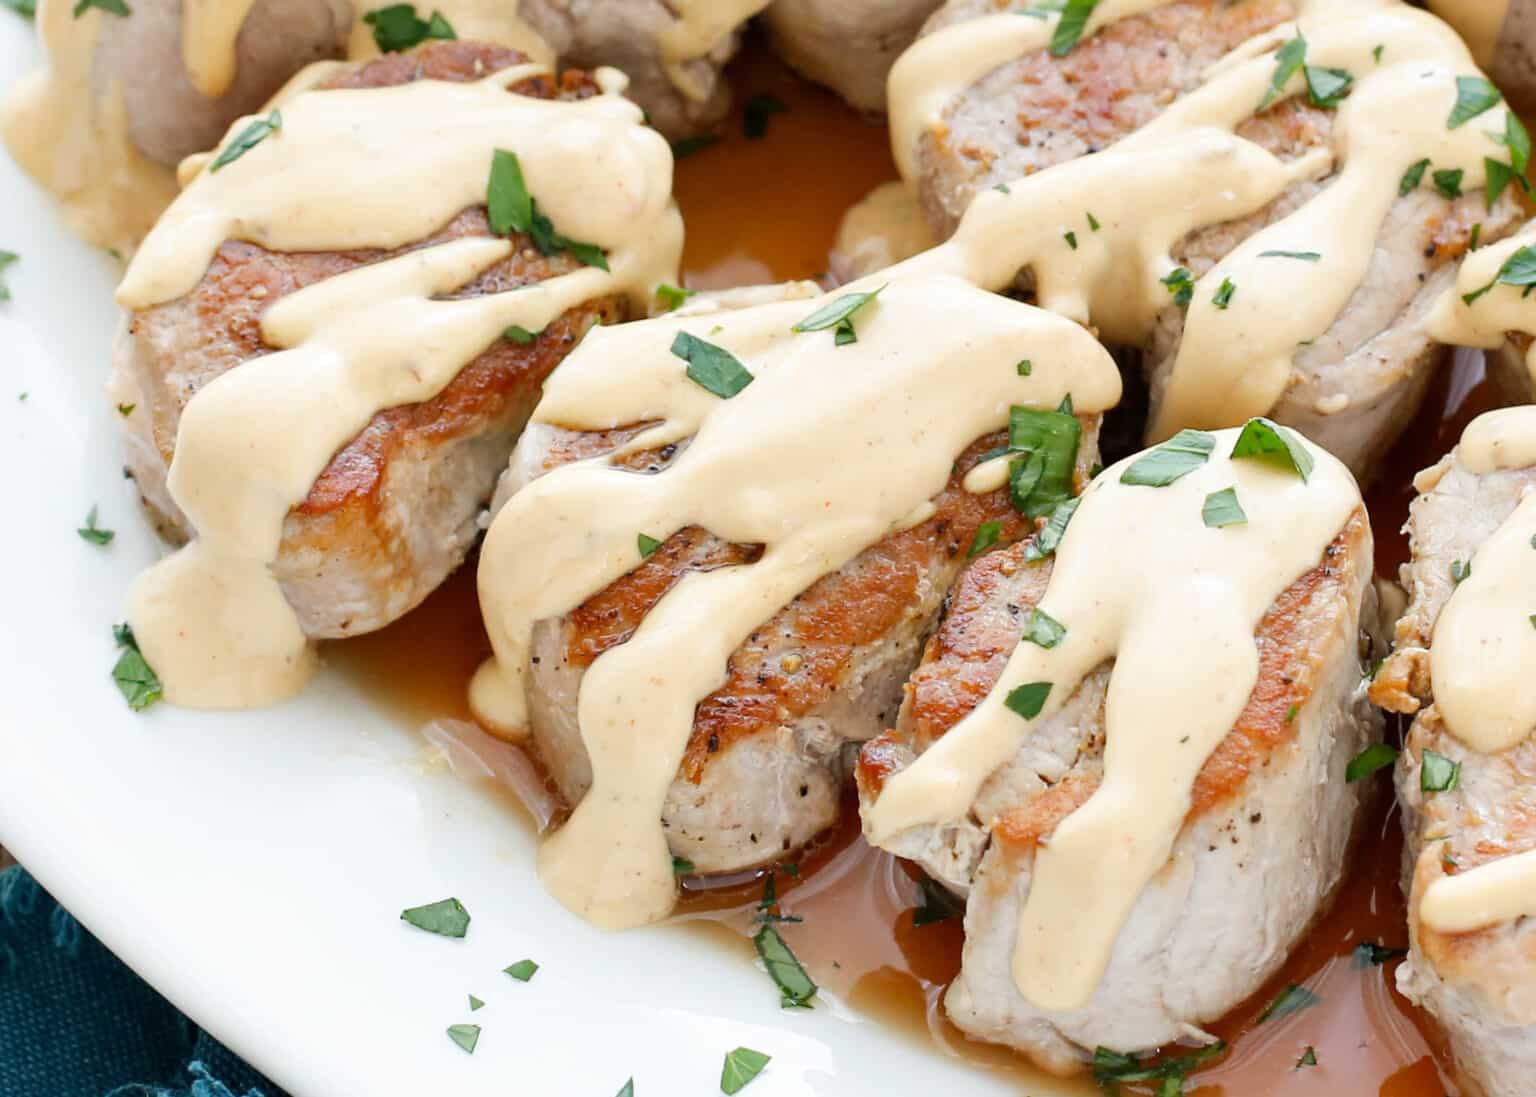 Pan Fried Pork Medallions With Creamy Wine Sauce Act One Art